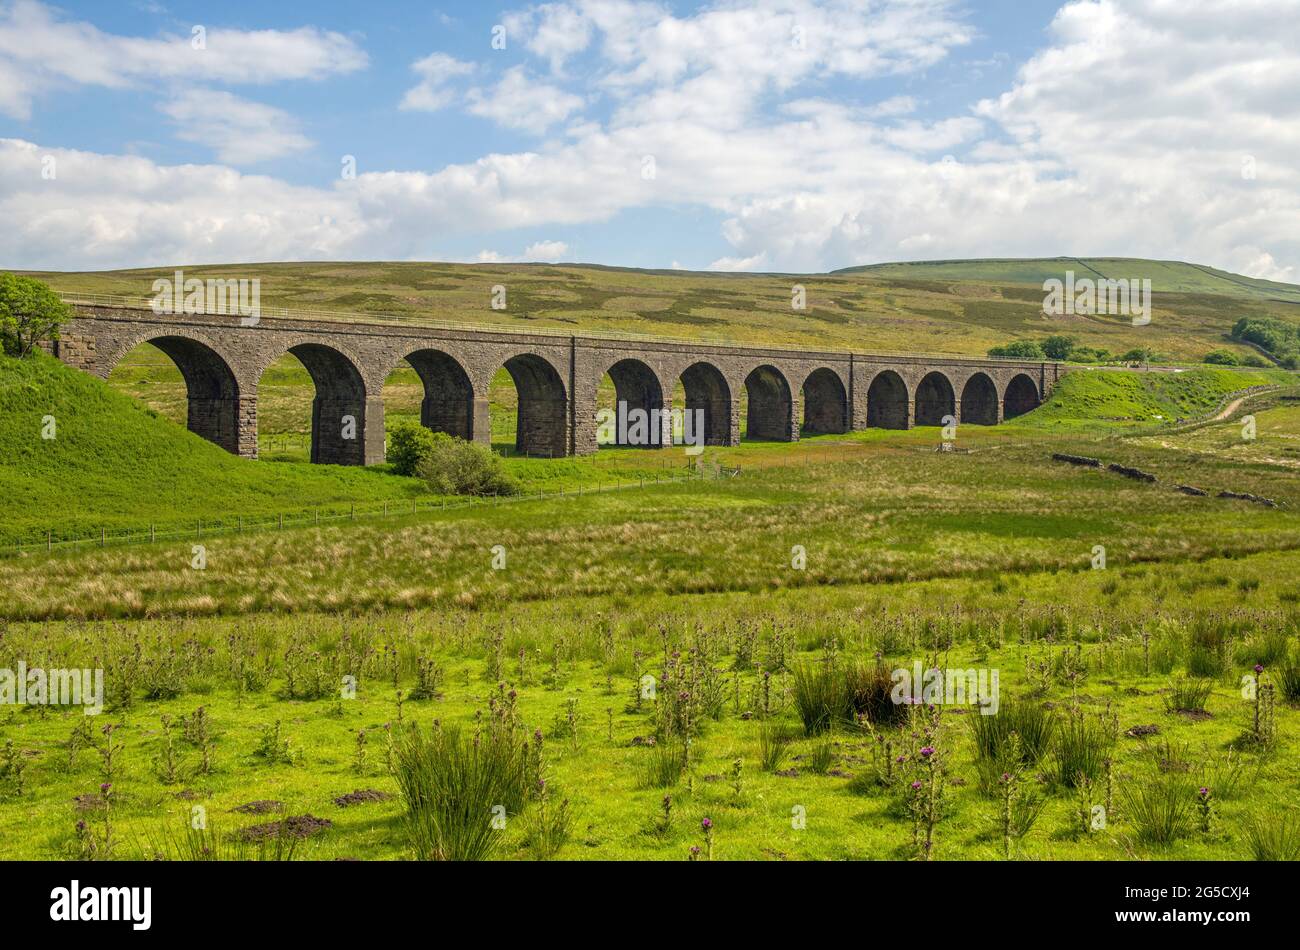 The Garsdale Railway Viaduct in use and very close to Garsdale Station in the Western Yorkshire Dales, Cumbria Stock Photo